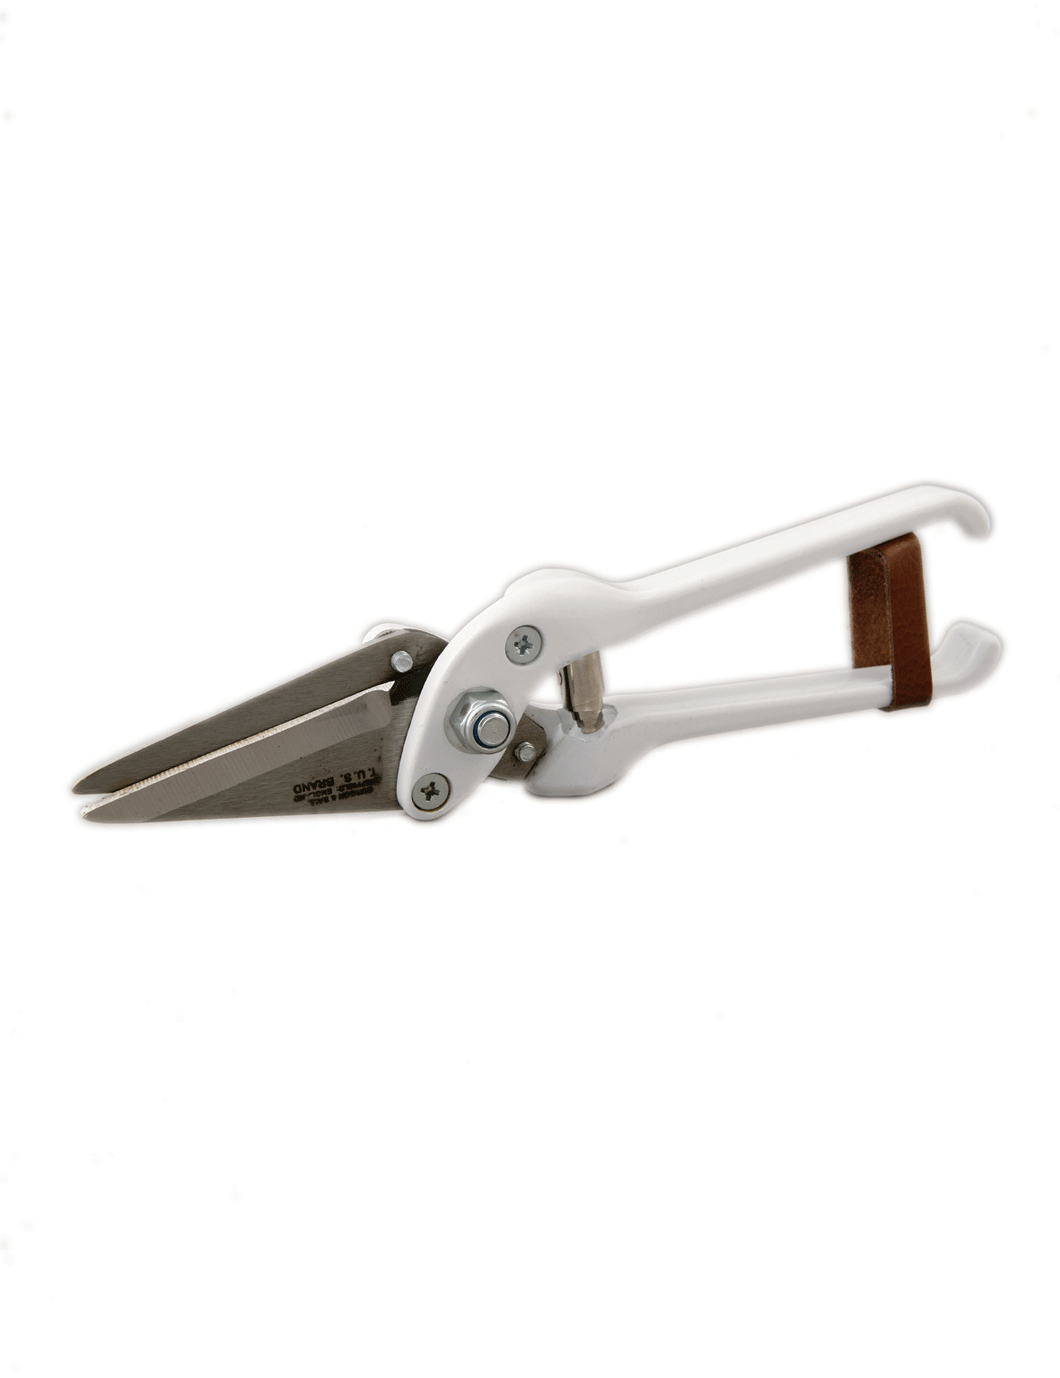 Burgon & Ball Serrated Footrot Shear - Sheepproducts.ie